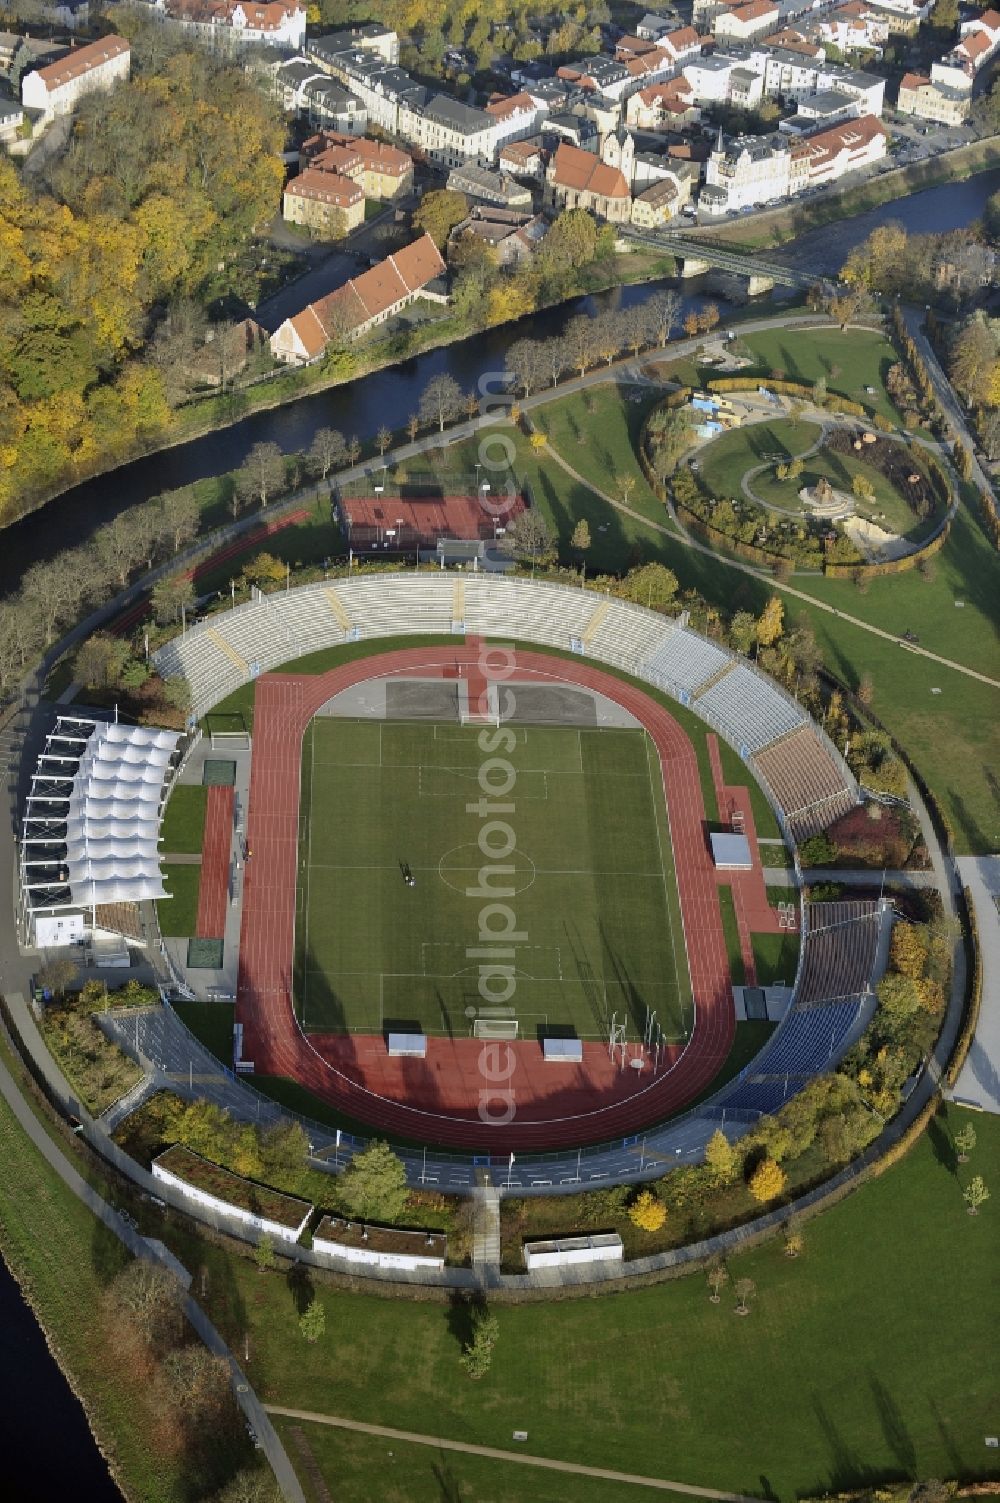 Aerial photograph Gera - Sports facility grounds of the Arena stadium Stadion of Freandschaft of BSG Wismut Gera on park Hofwiesenpark in Gera in the state Thuringia, Germany